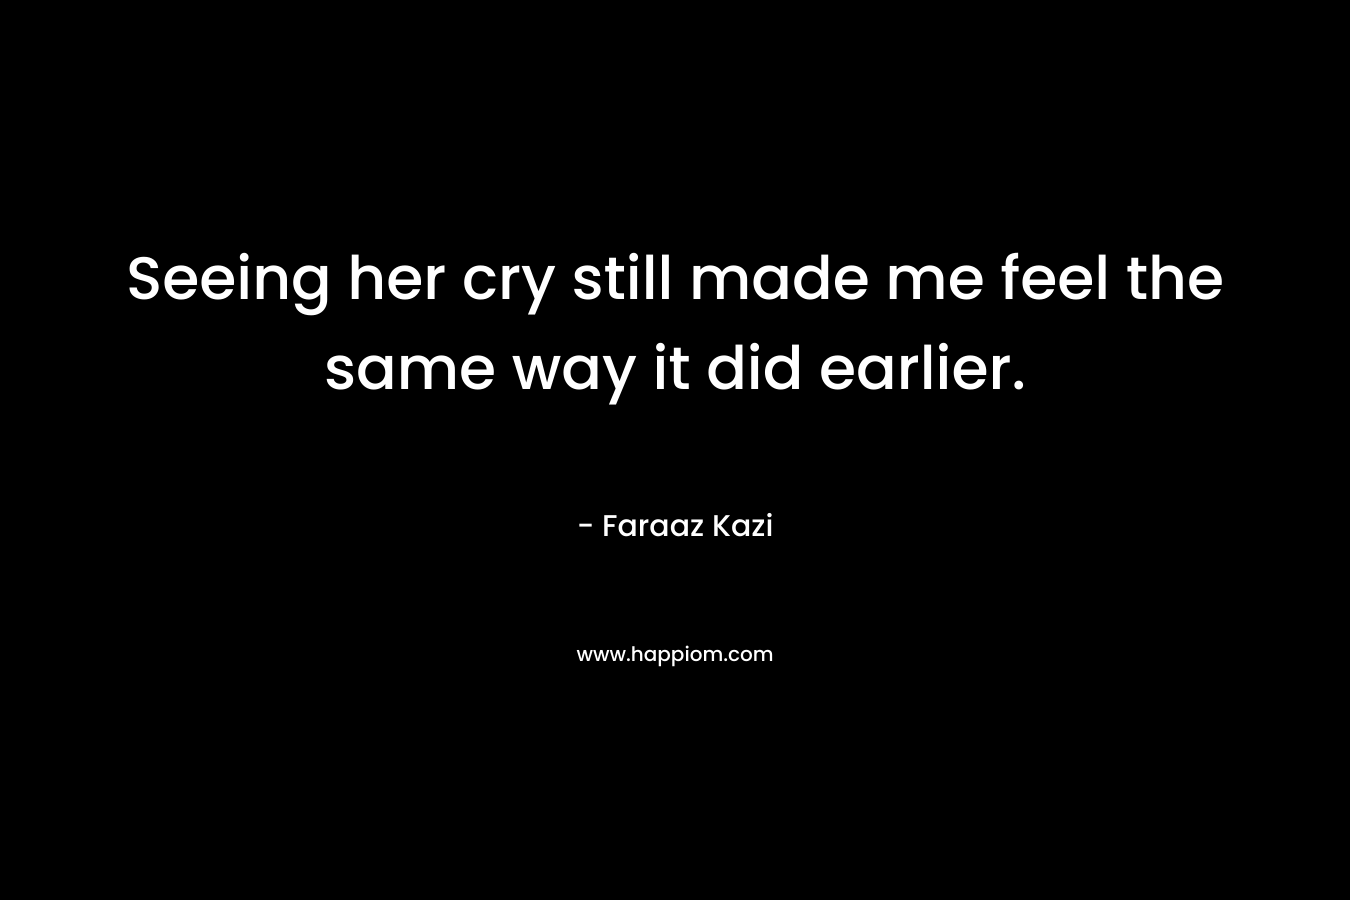 Seeing her cry still made me feel the same way it did earlier. – Faraaz Kazi